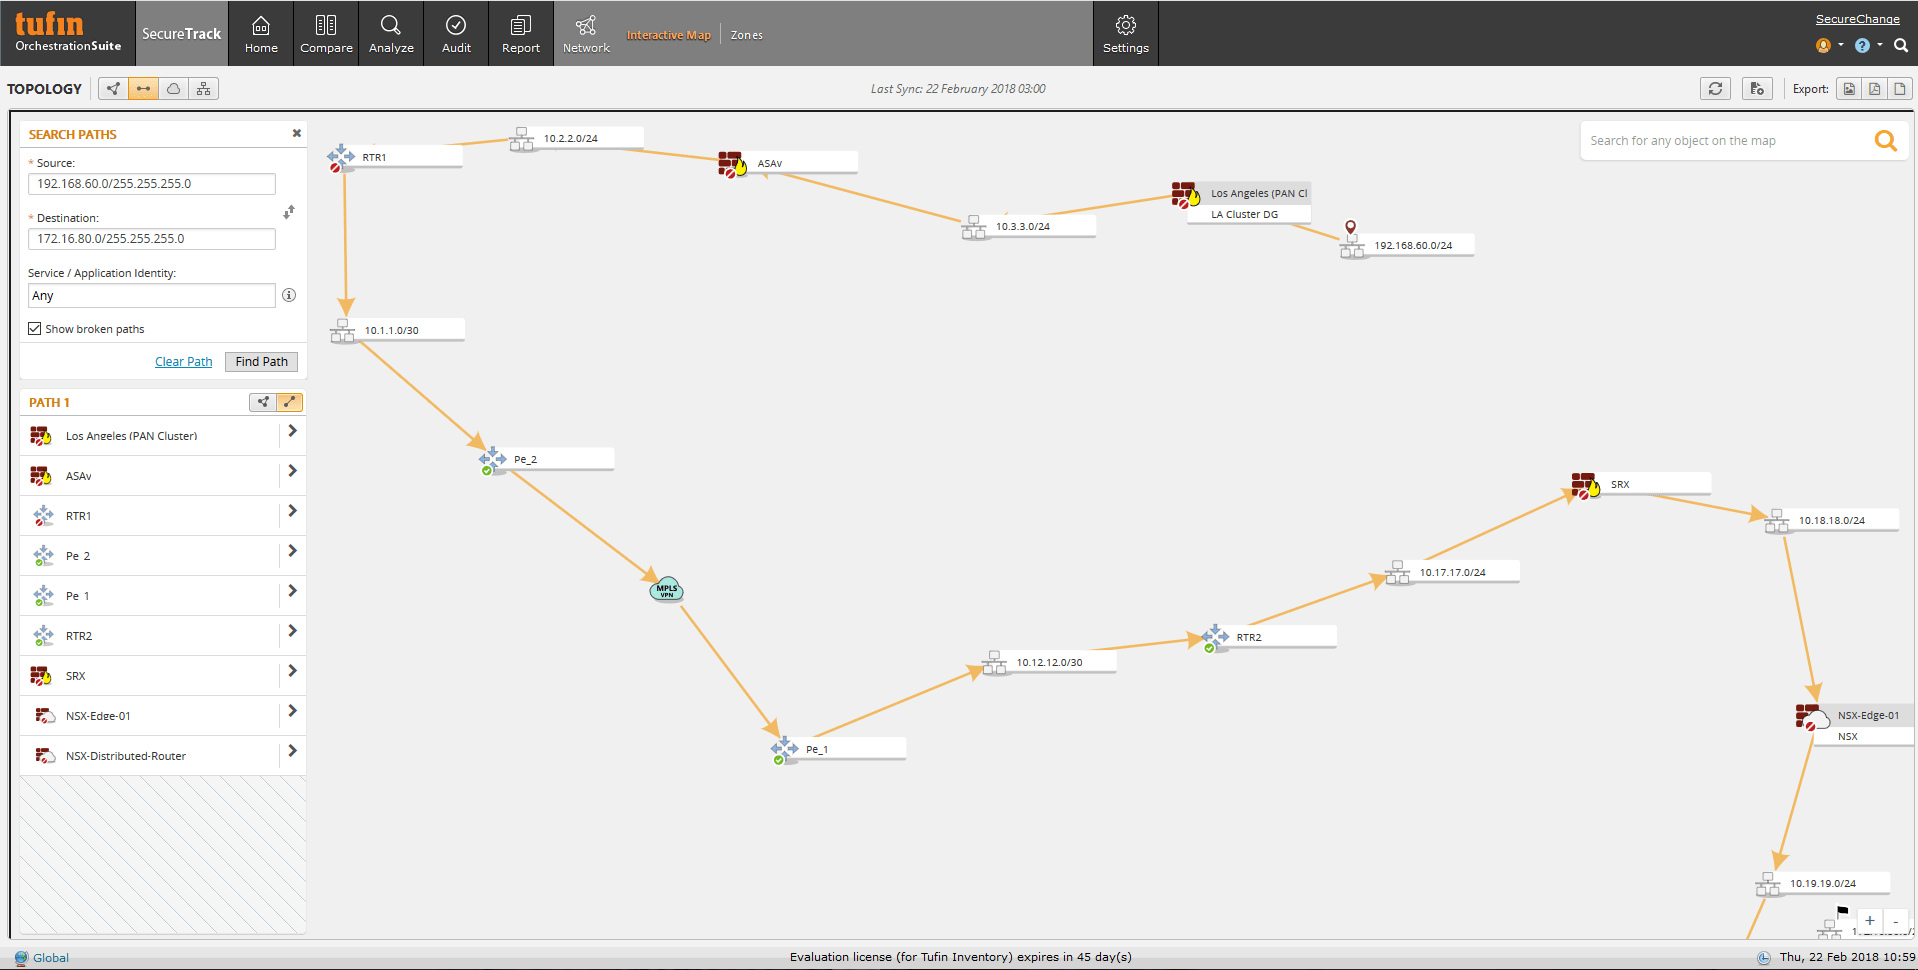 Tufin’s interactive topology map enables running path analysis across vendors to troubleshoot connectivity